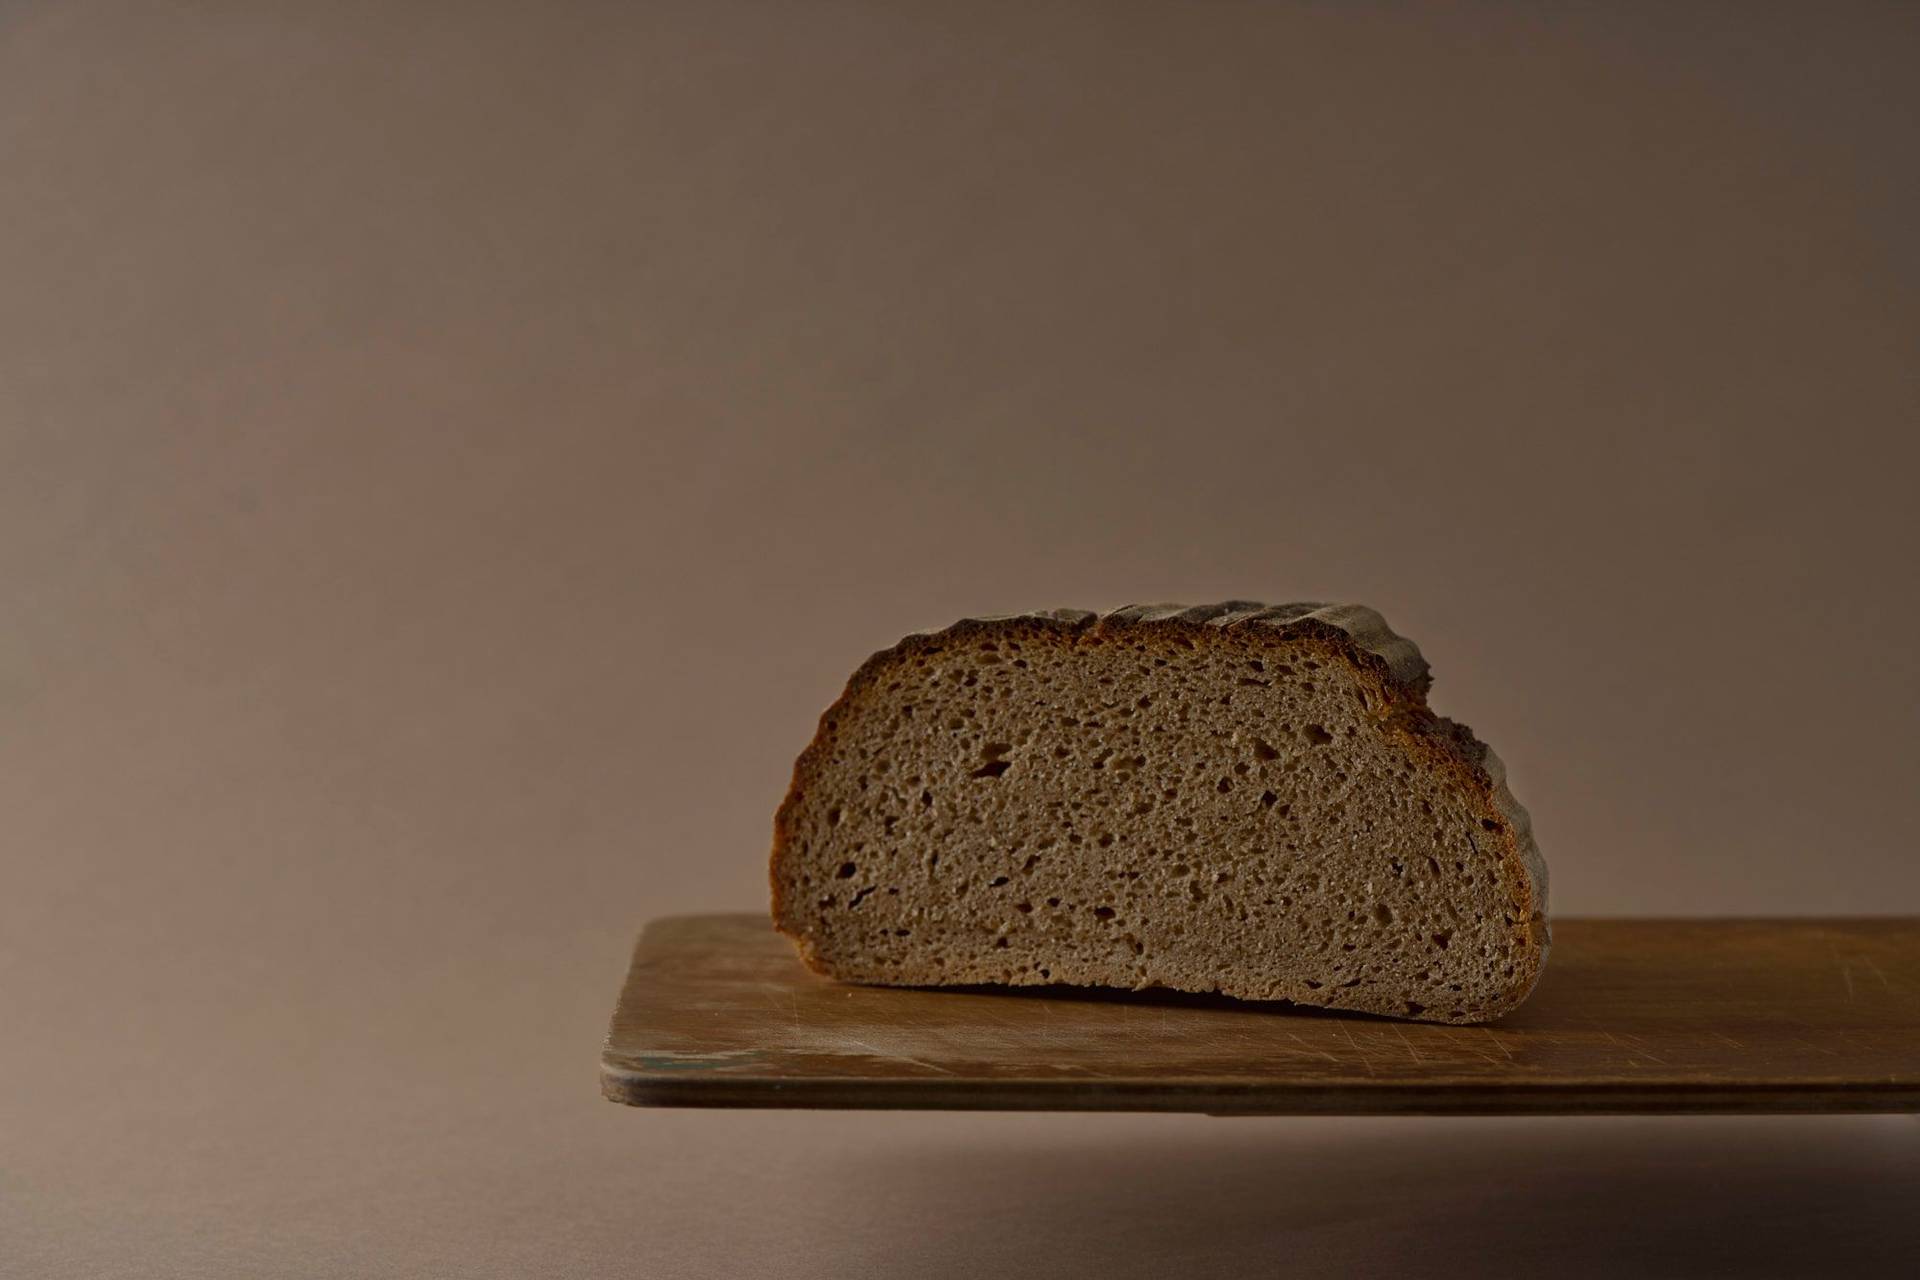 a loaf of rye sourdough bread on a wooden board with brown background